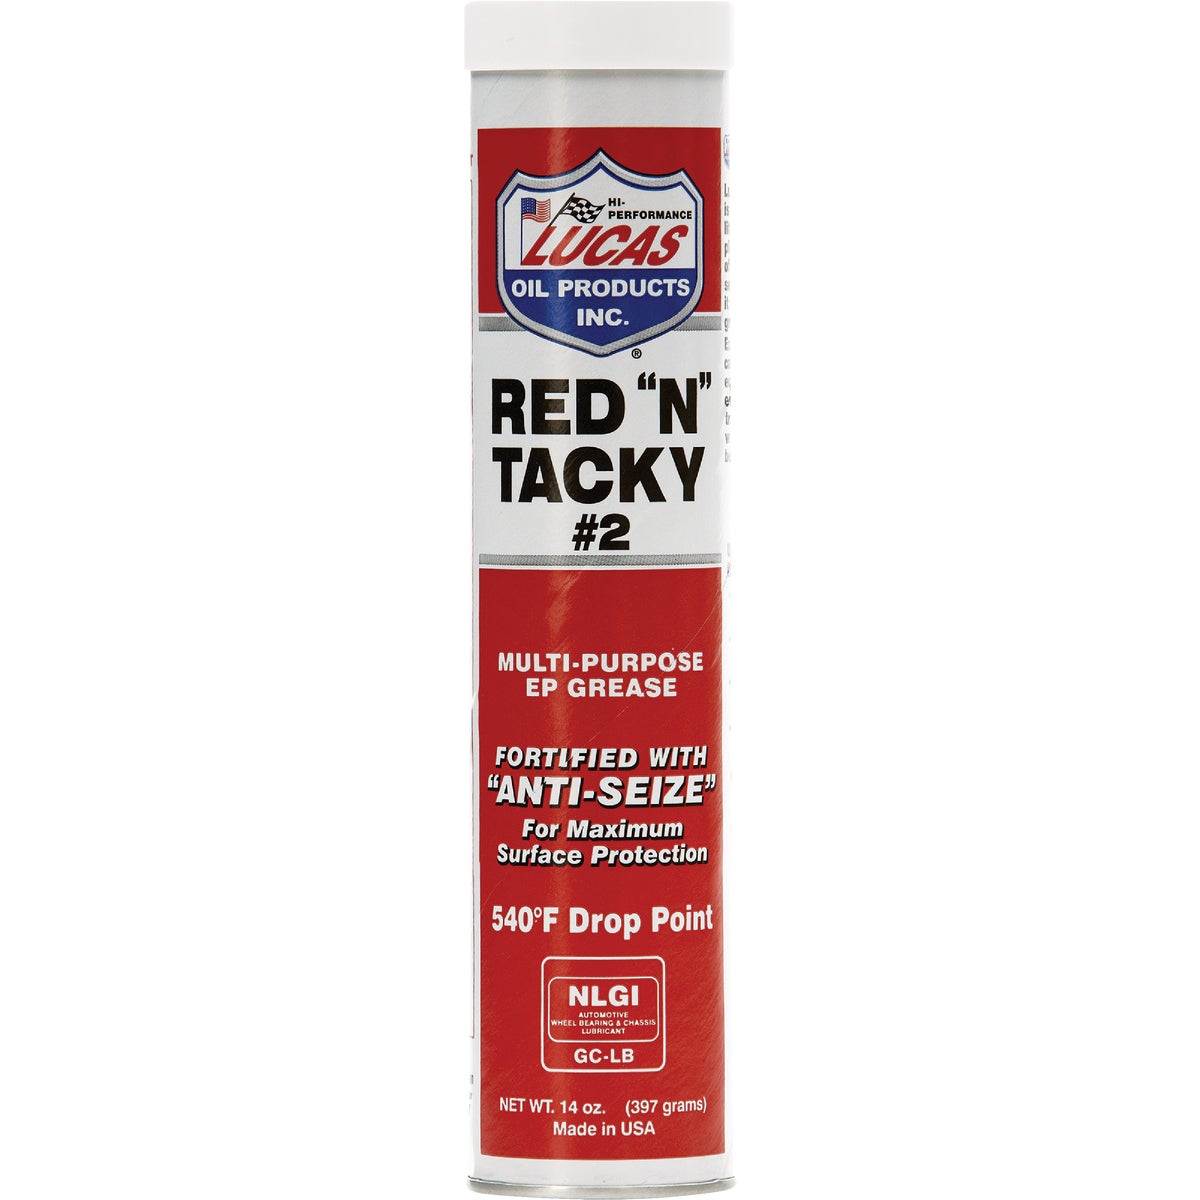 Item 570044, Red 'N' Tacky Grease is a smooth, tacky, red lithium complex multi-purpose 